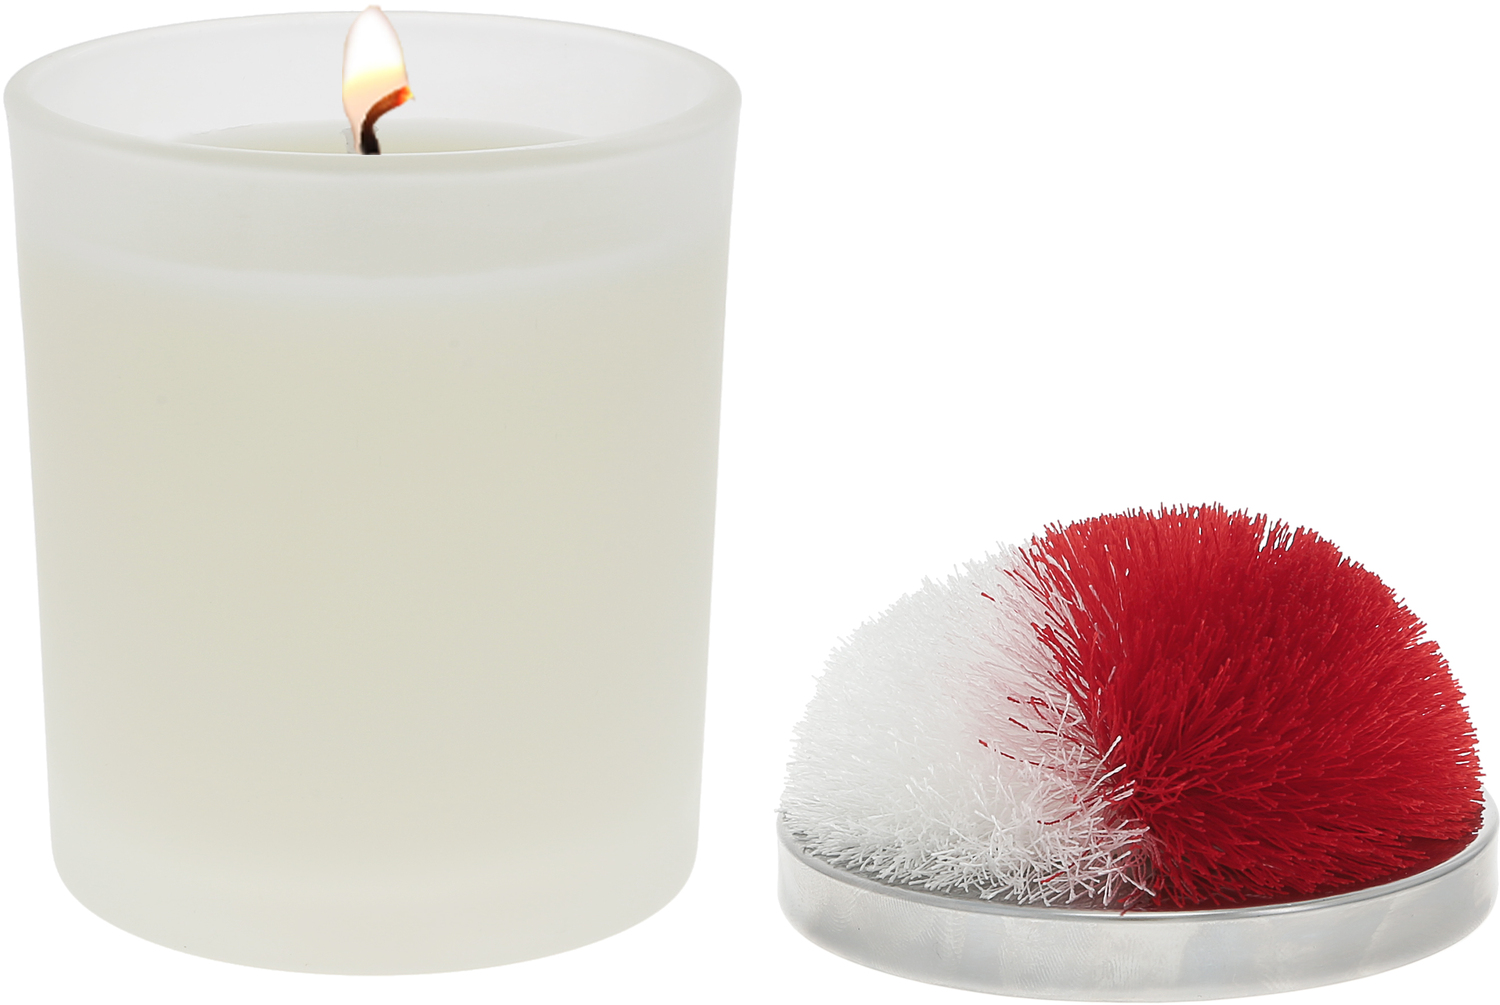 Blank - Red & White by Repre-Scent - Blank - Red & White - 5.5 oz - 100% Soy Wax Candle with Pom Pom Lid
Scent: Tranquility